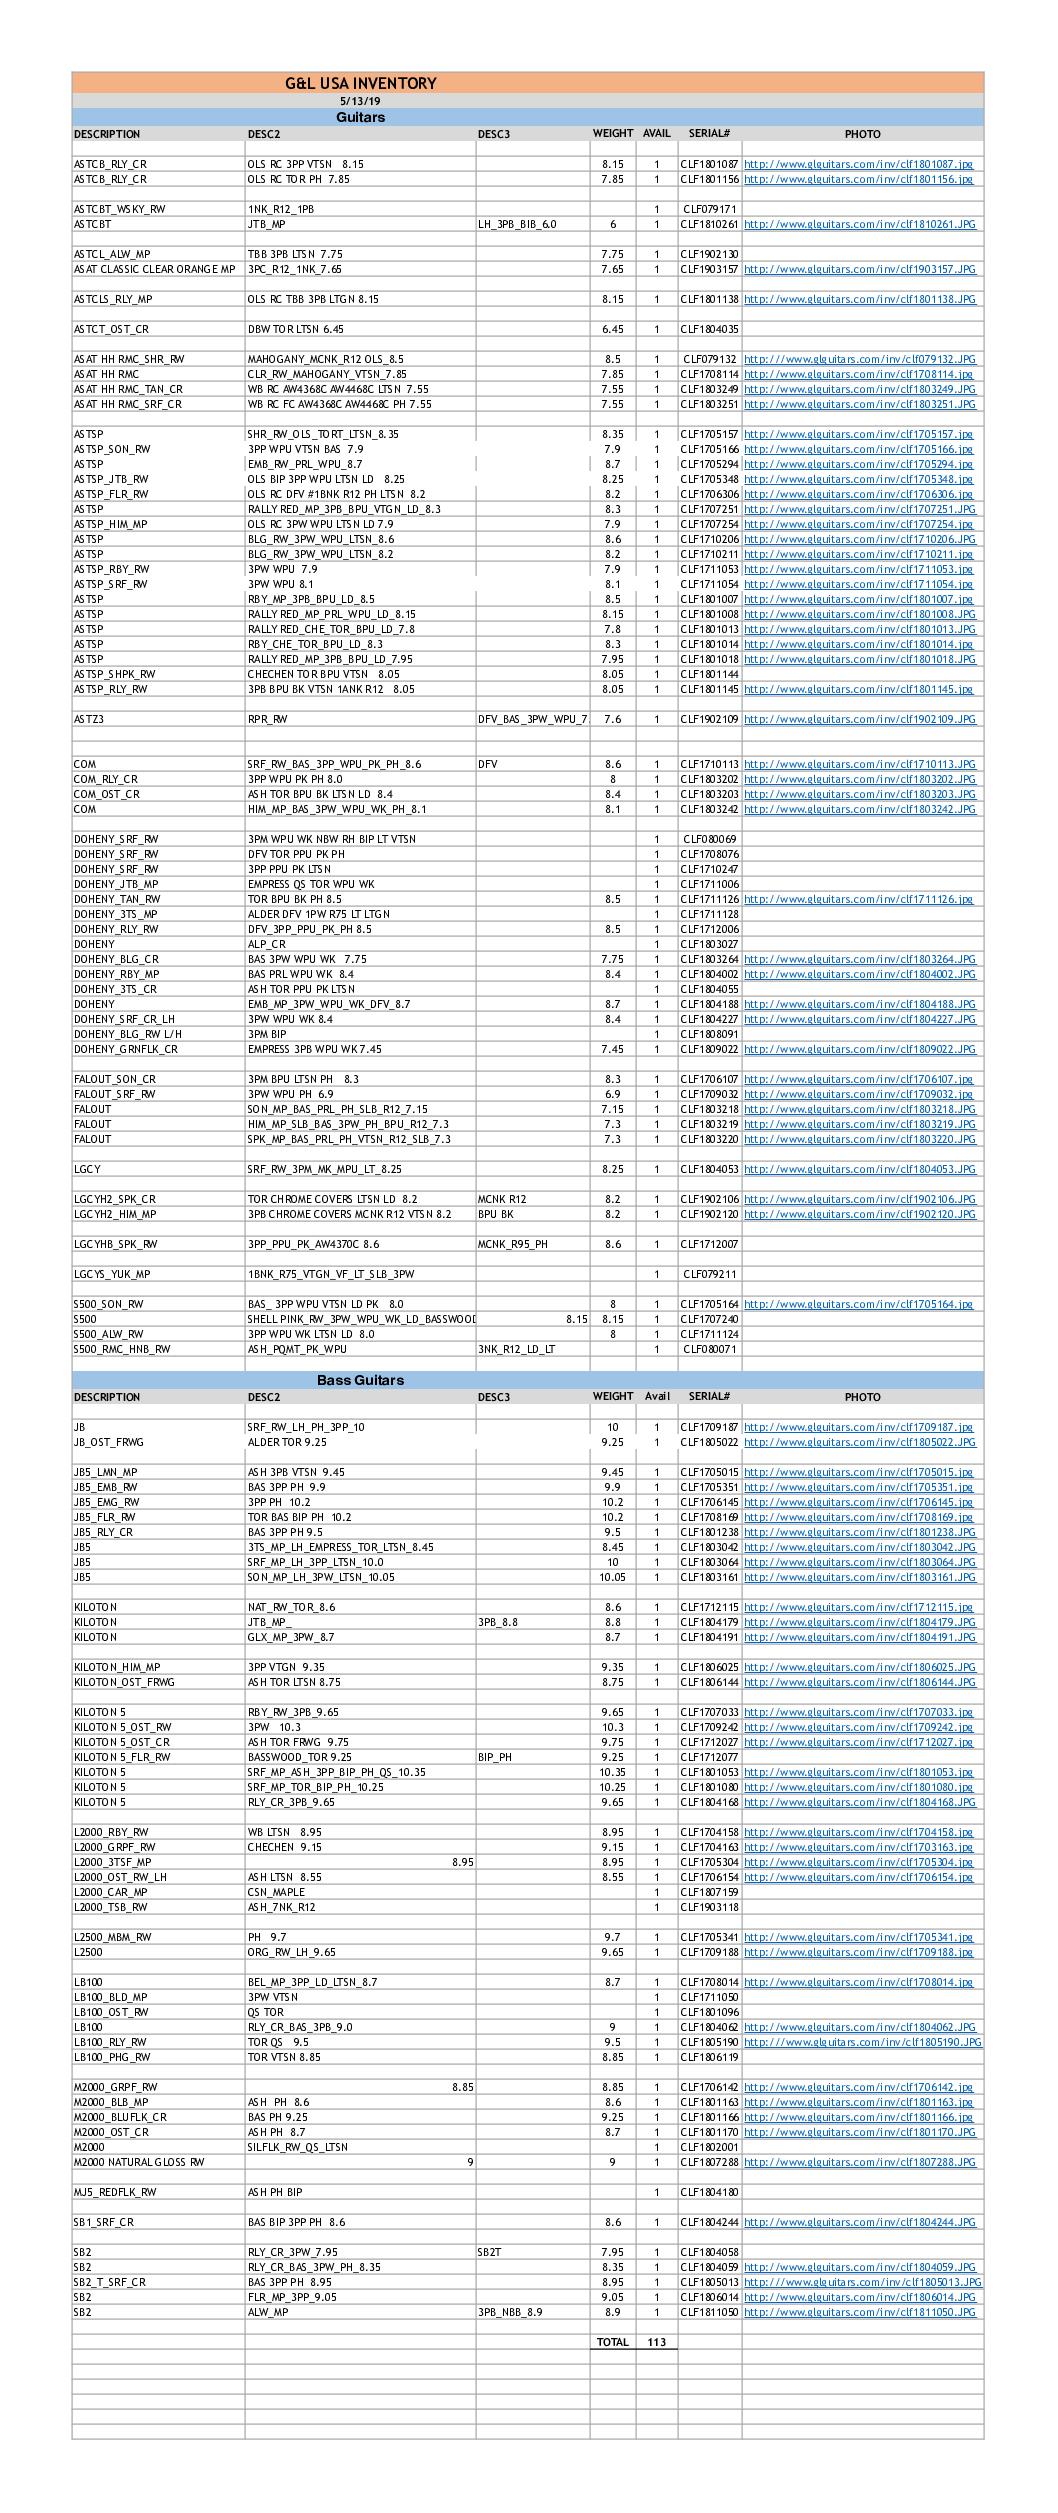 G&L Inventory-05/13/2019 (PDF) - with Option Codes